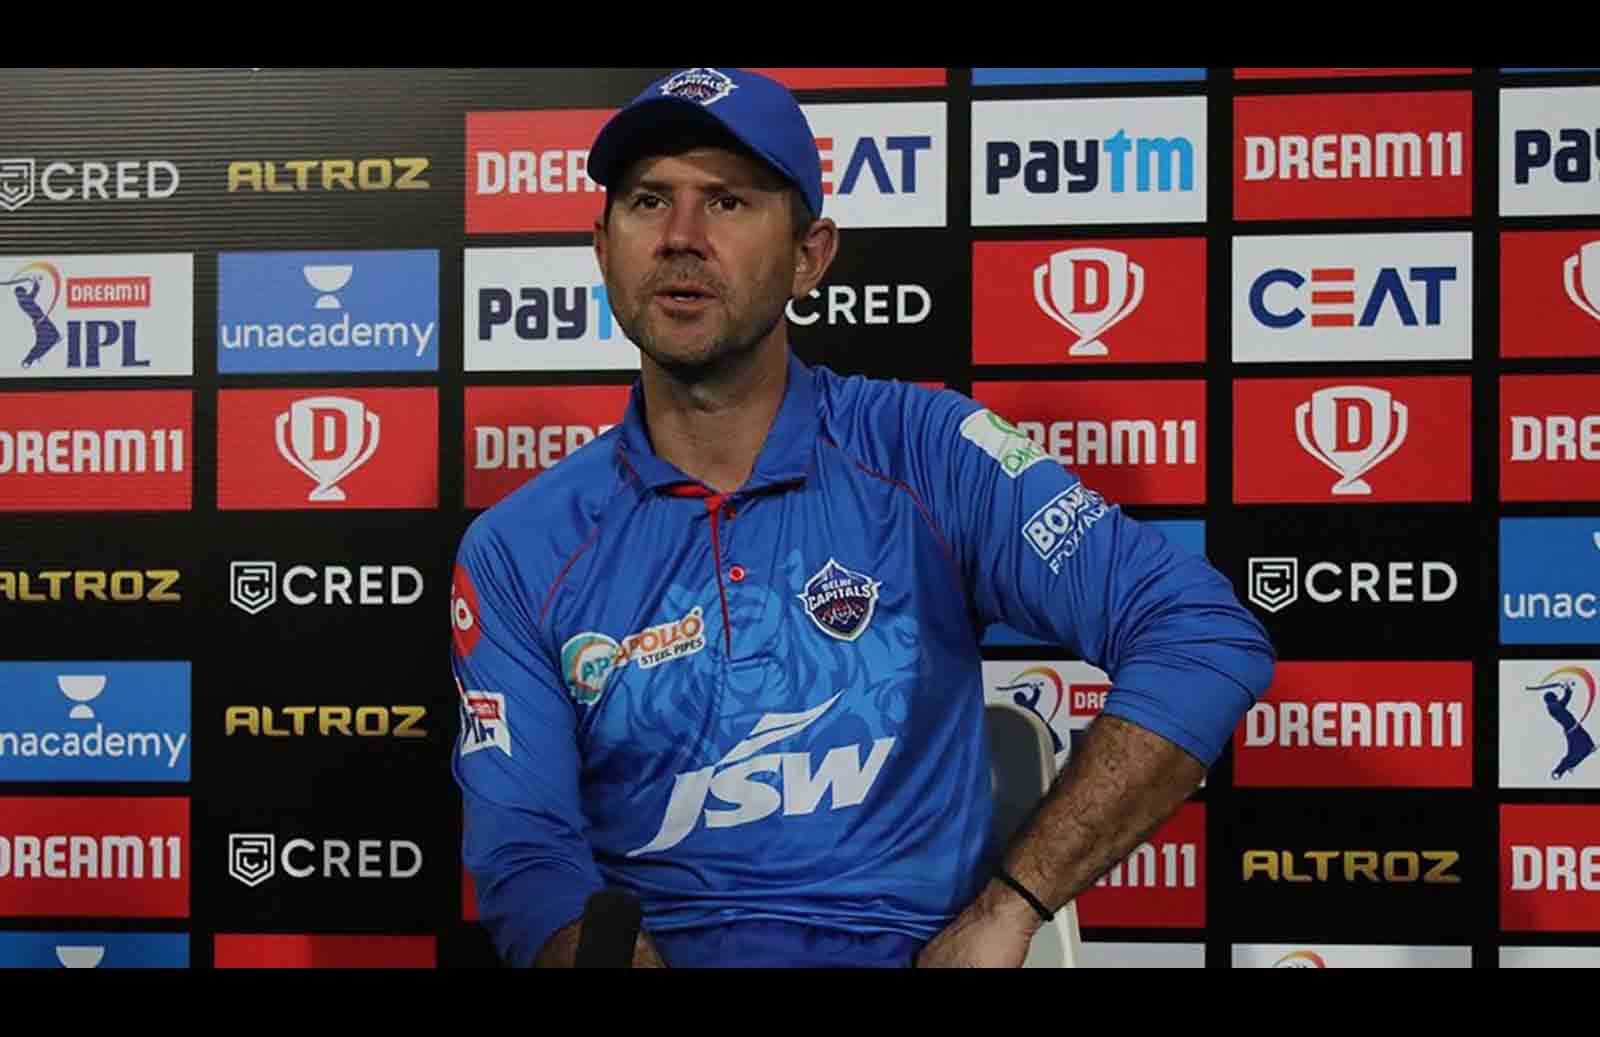 "We were outplayed, no excuses from us," says Ricky Ponting after DC lost to SRH